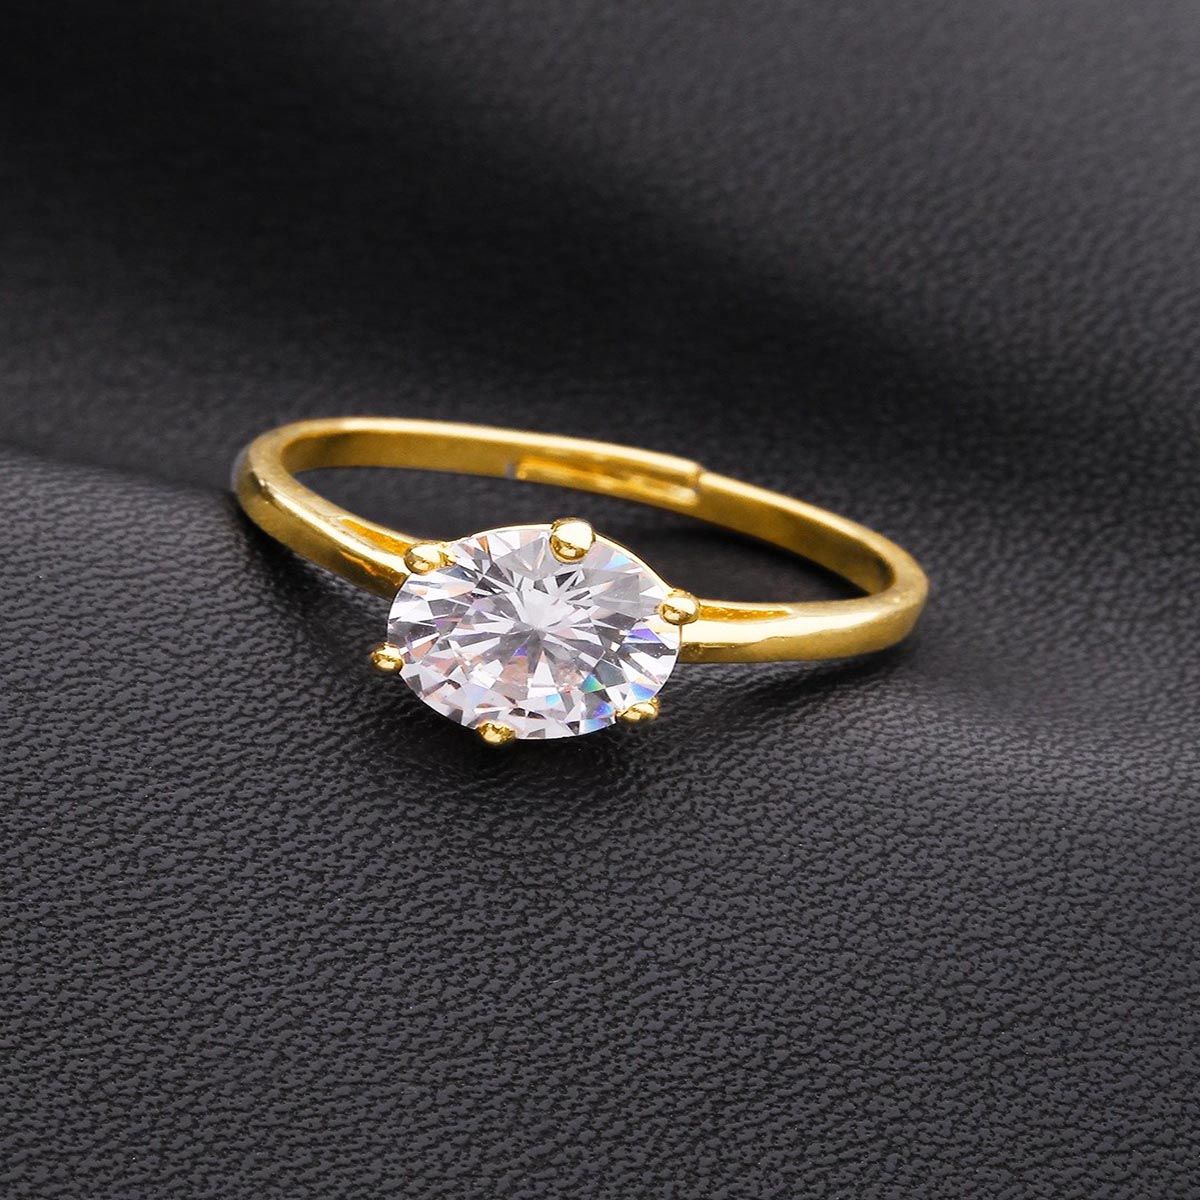 Priyaasi Gold-Plated Ad, American Diamond Studded Handcrafted ...